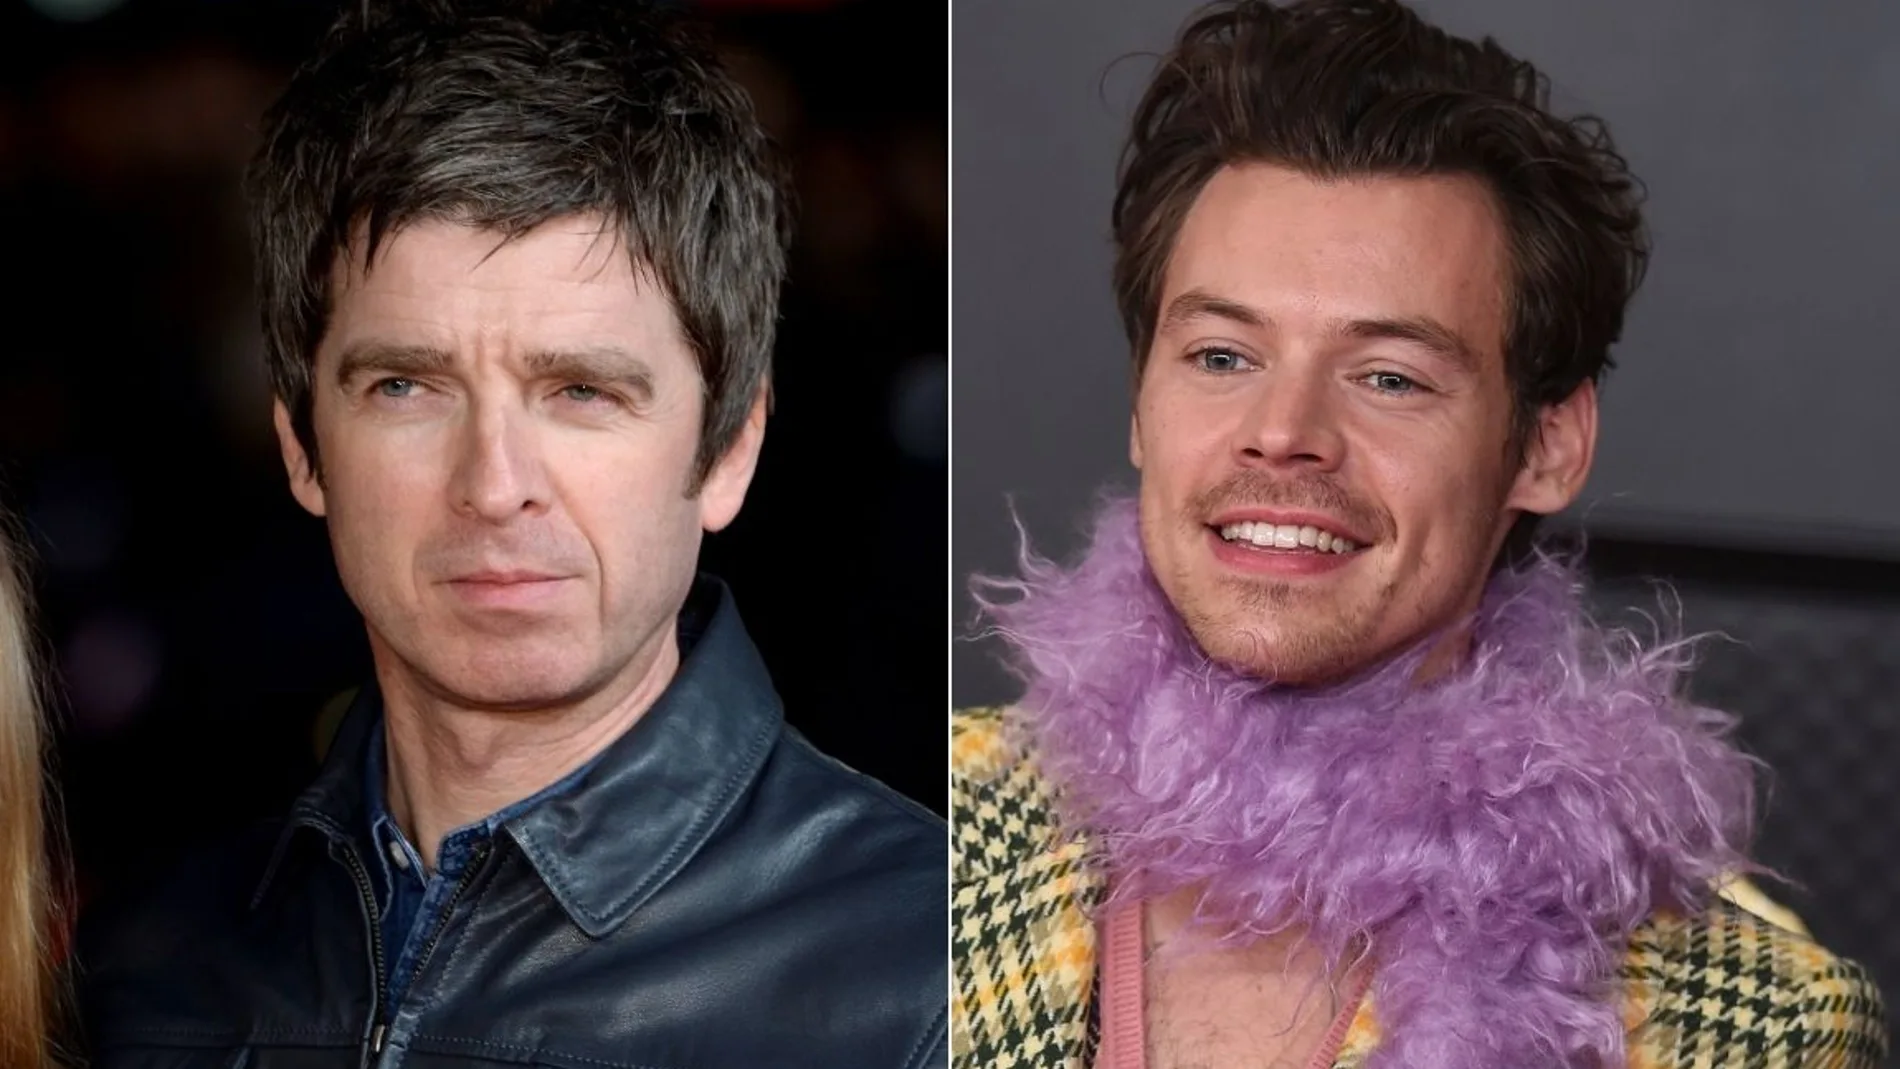 Noel Gallagher carga contra Harry Styles